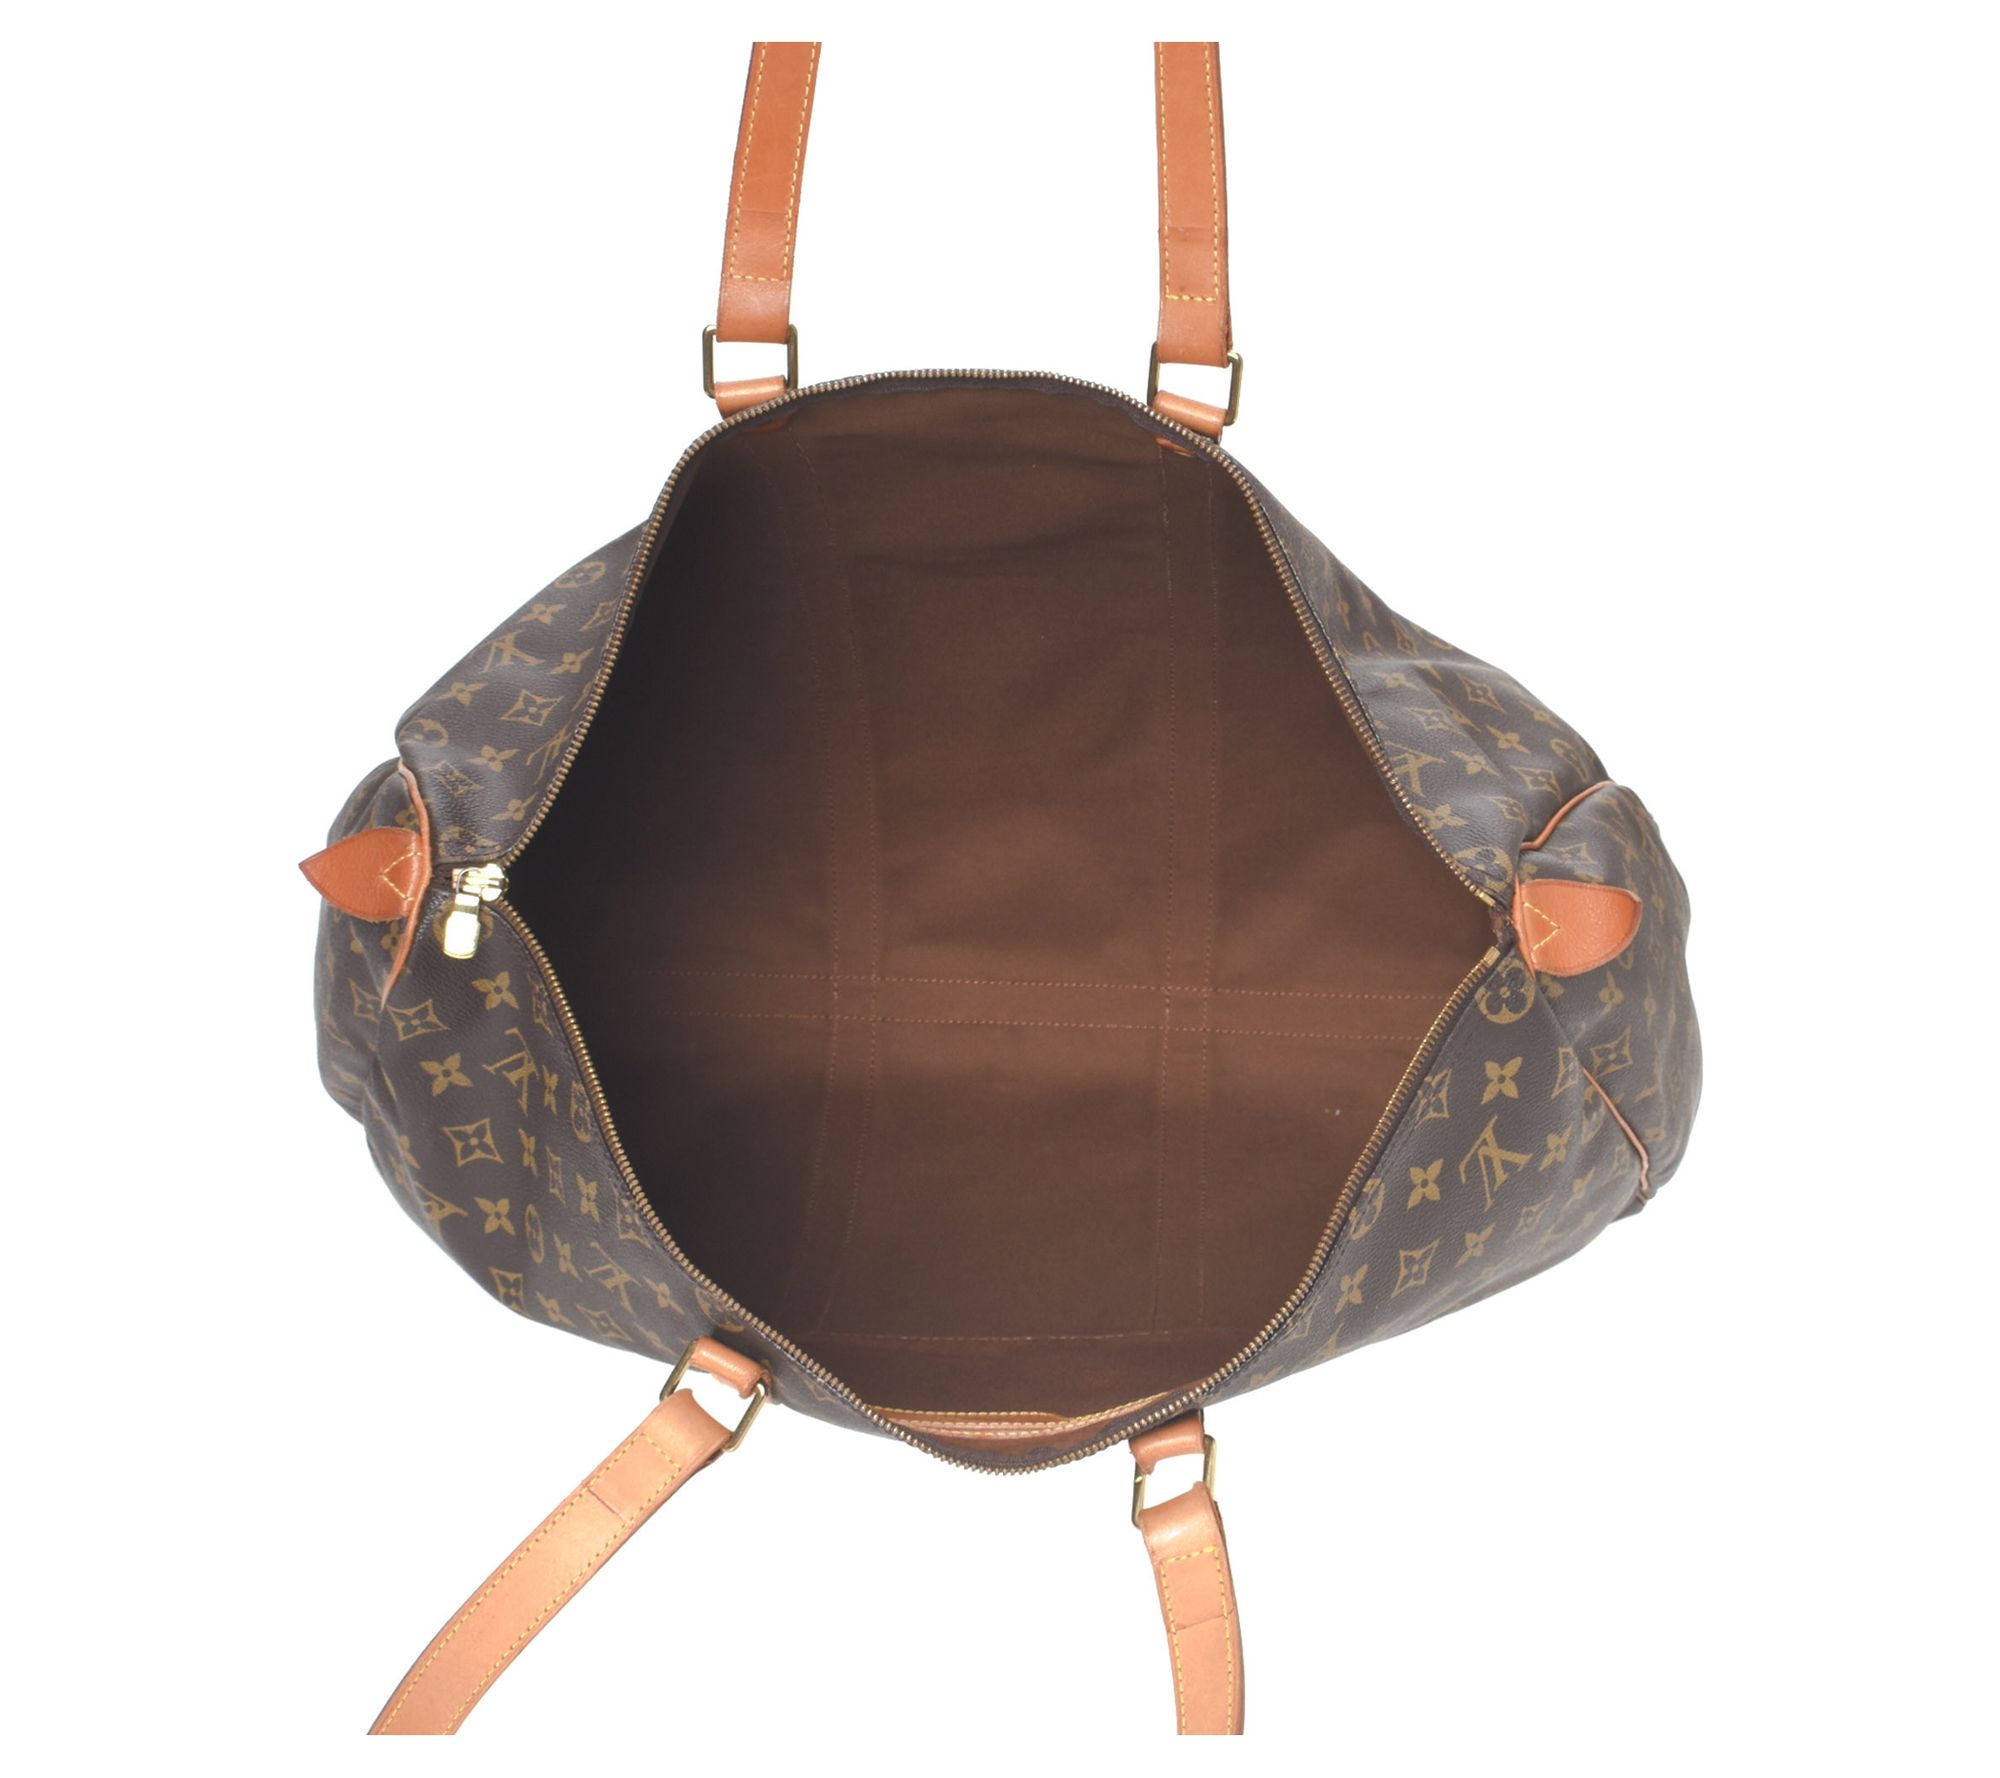 What Fits in the Louis Vuitton Sac Flanerie 50